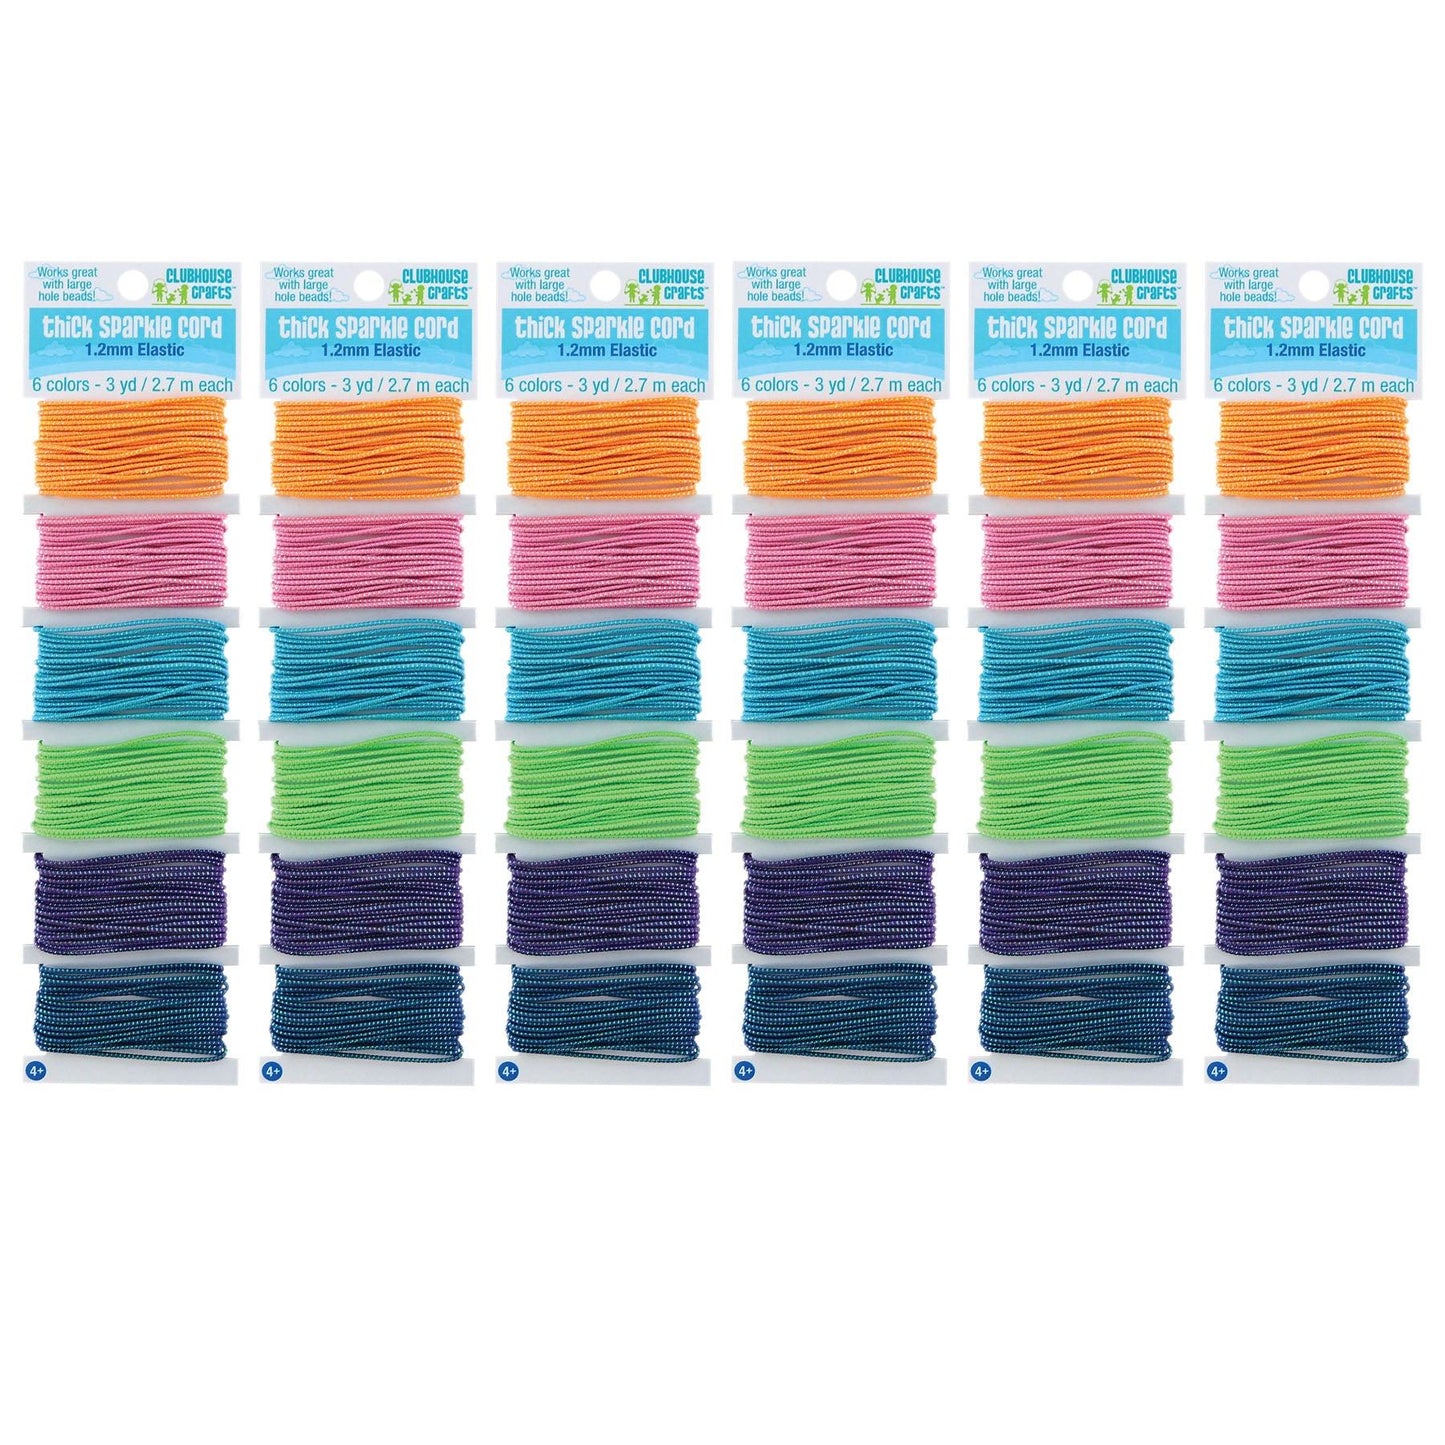 Thick Sparkle Elastic Cord, 6 Colors, 18 Yards Per Pack, 6 Packs - Loomini